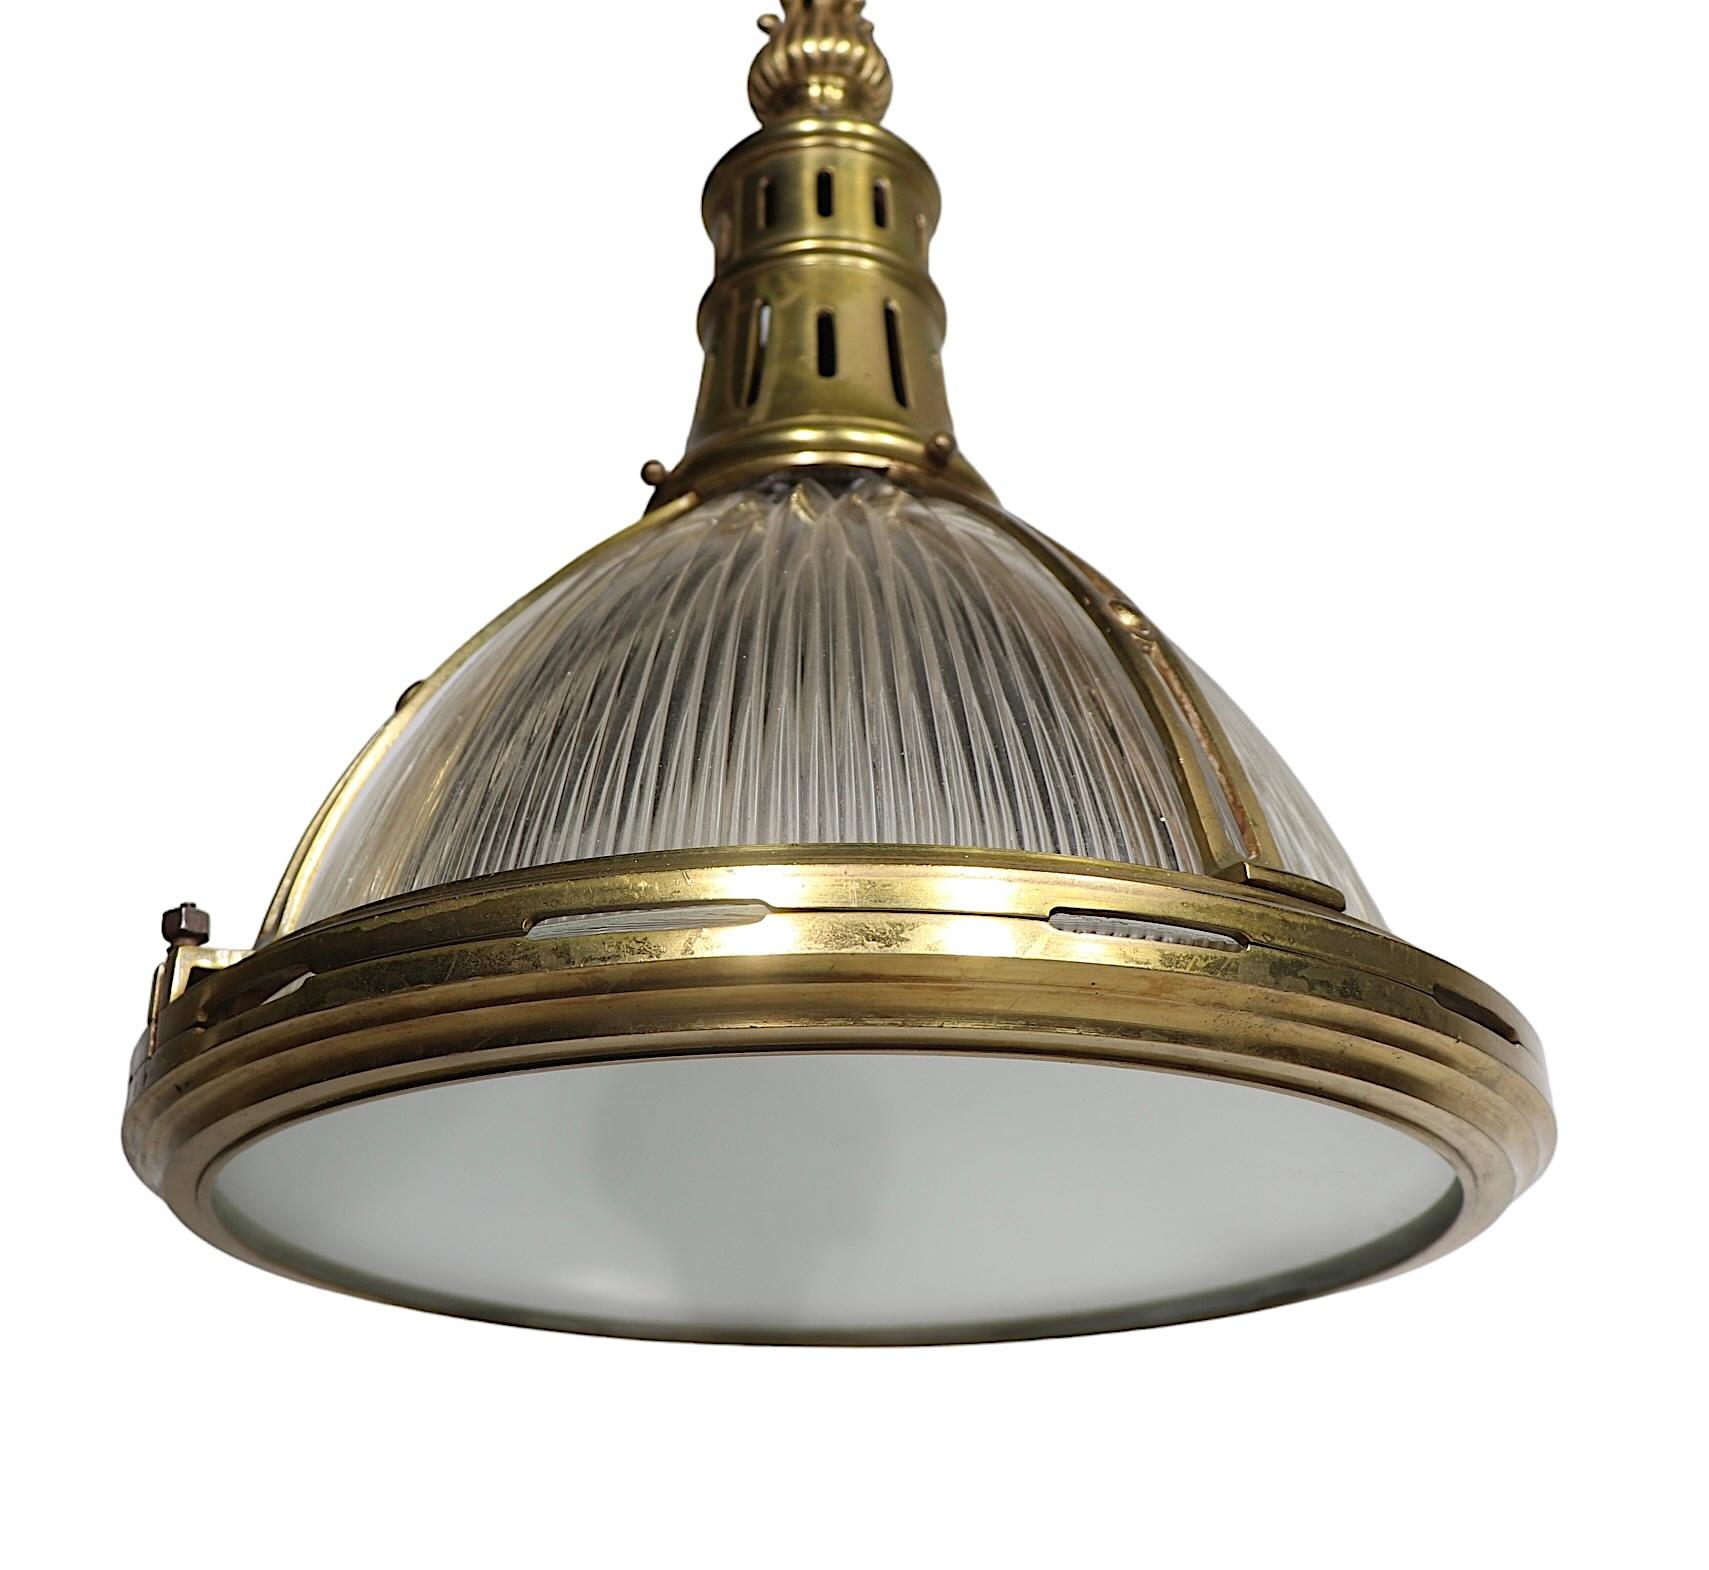 Exceptional Halophane  pendant fixture featuring a decorative cast brass frame, with swing open glass bottom diffuser shade, and classic Halophane ribbed glass shade. The chandelier  is in very fine, working, clean and ready to install condition,